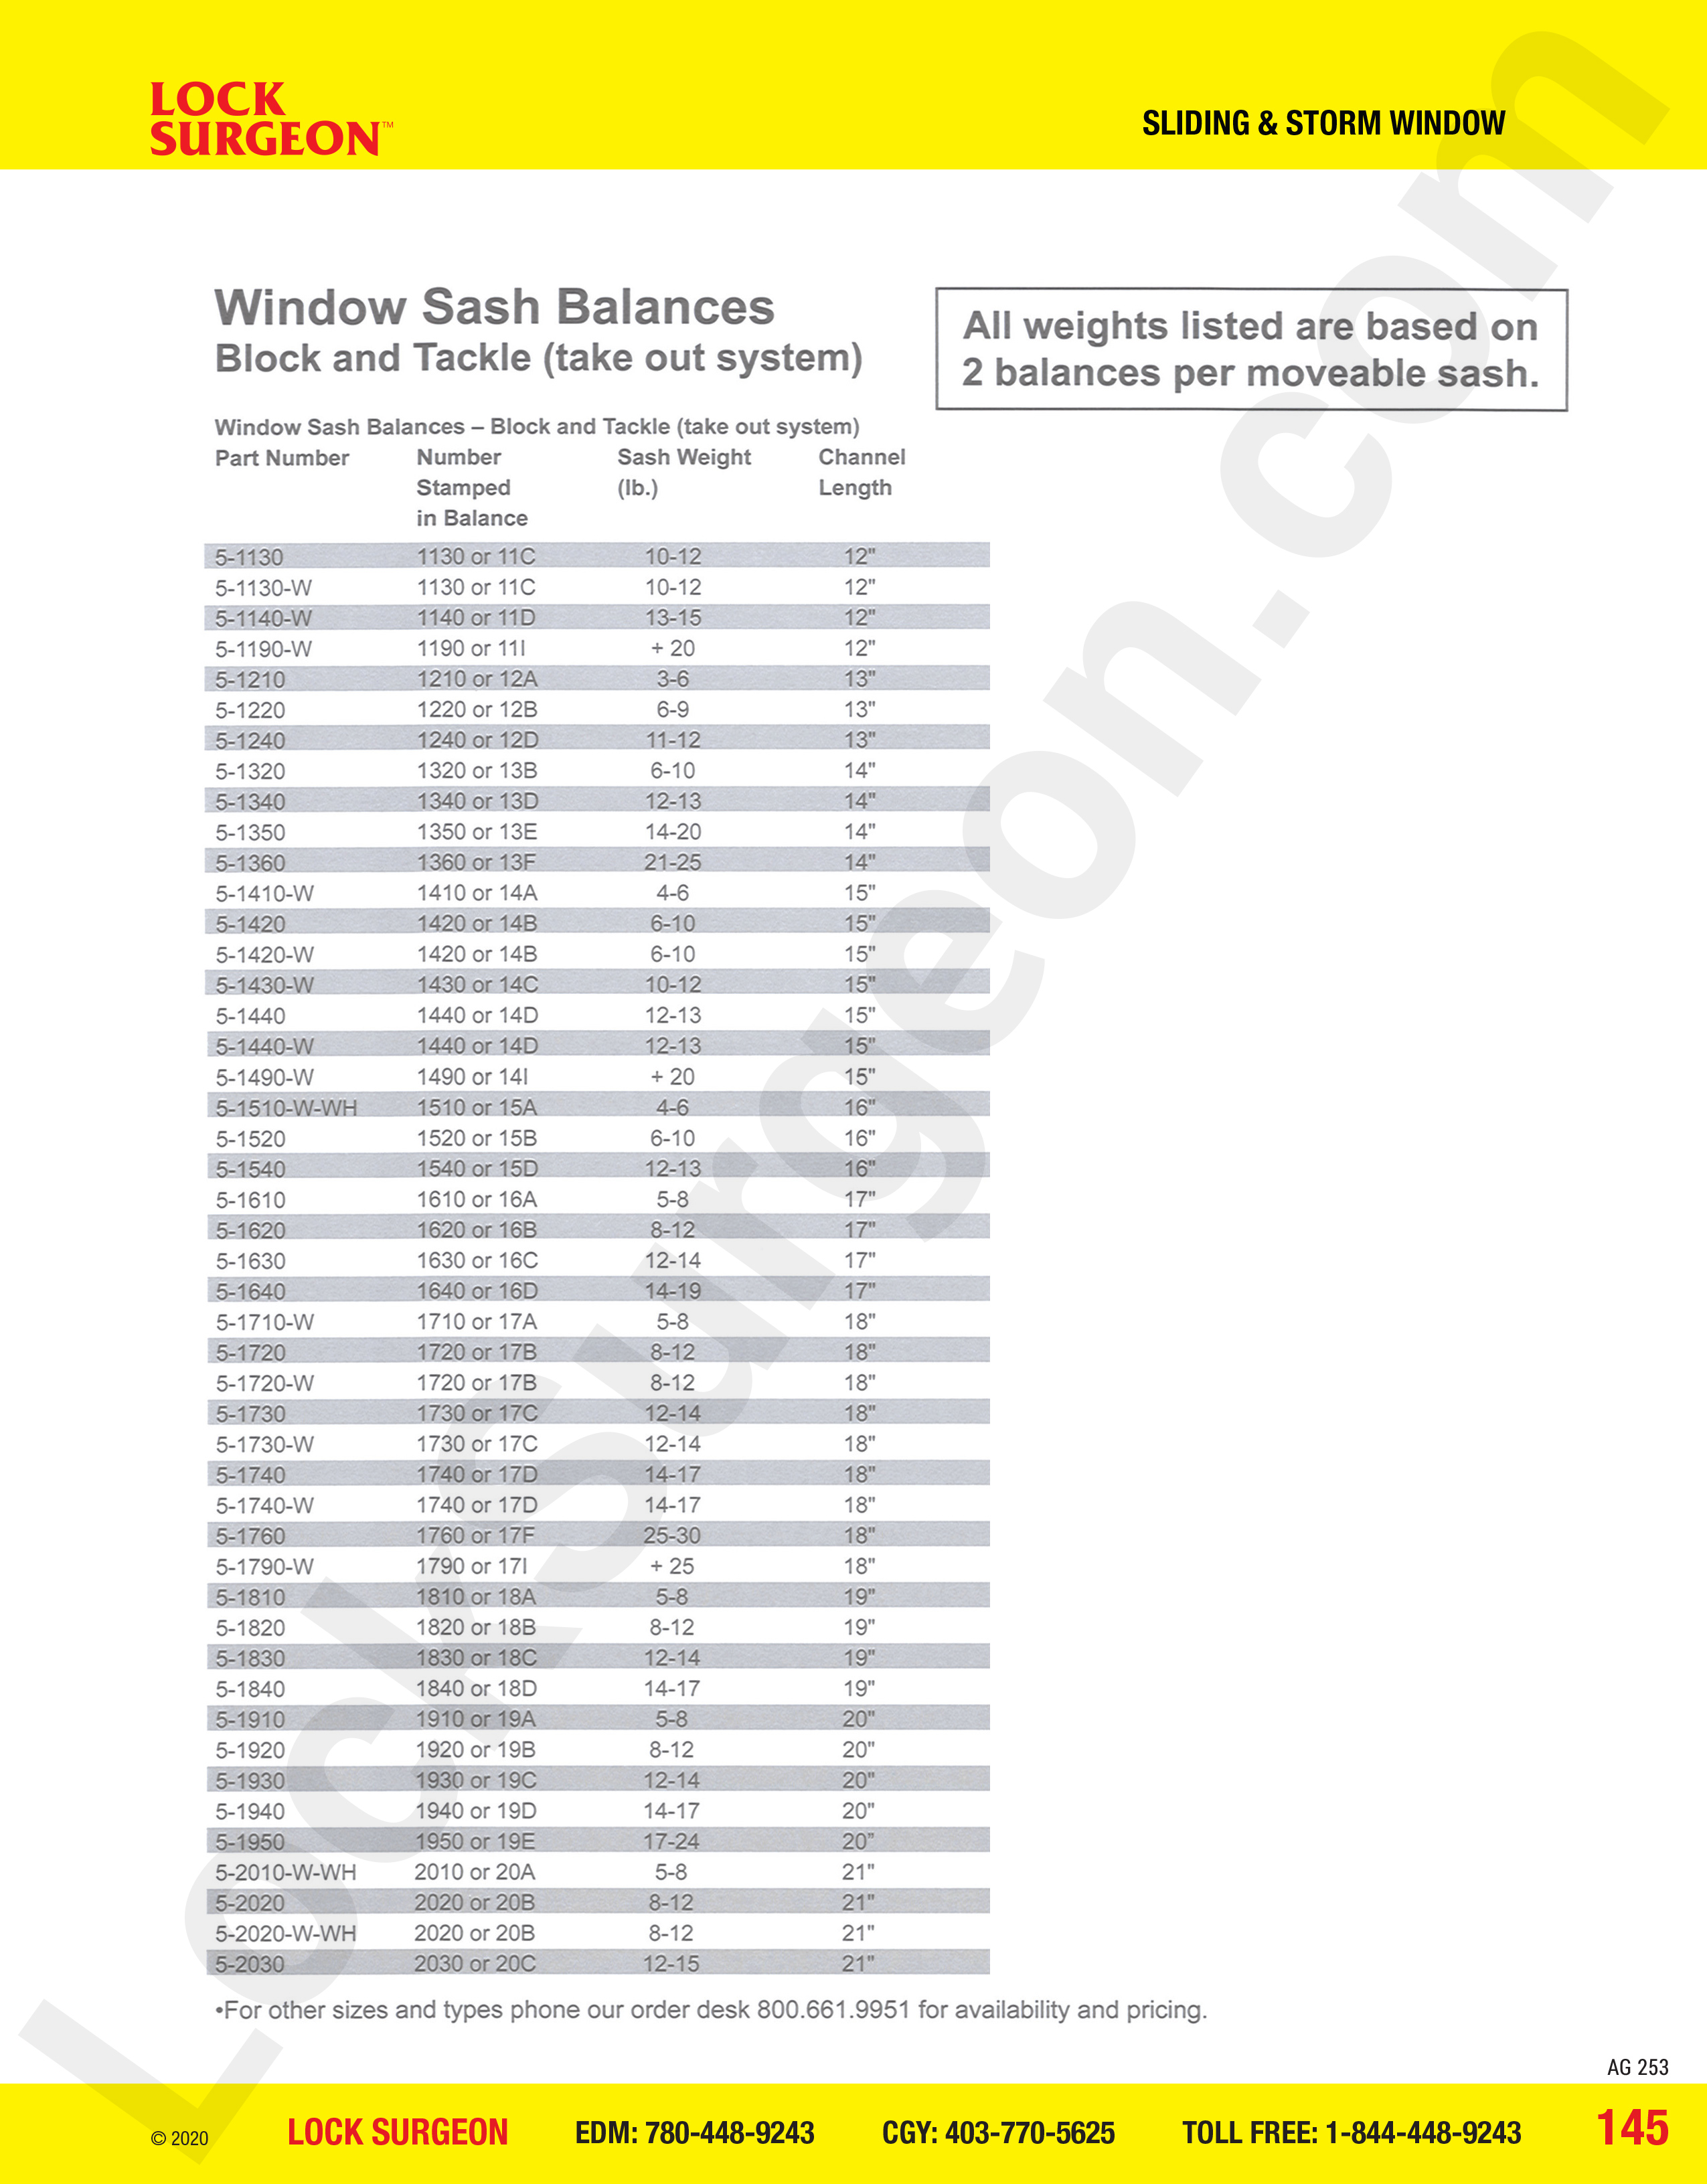 Window sash balances for block and tackle system (take out system), two balances per movable sash.